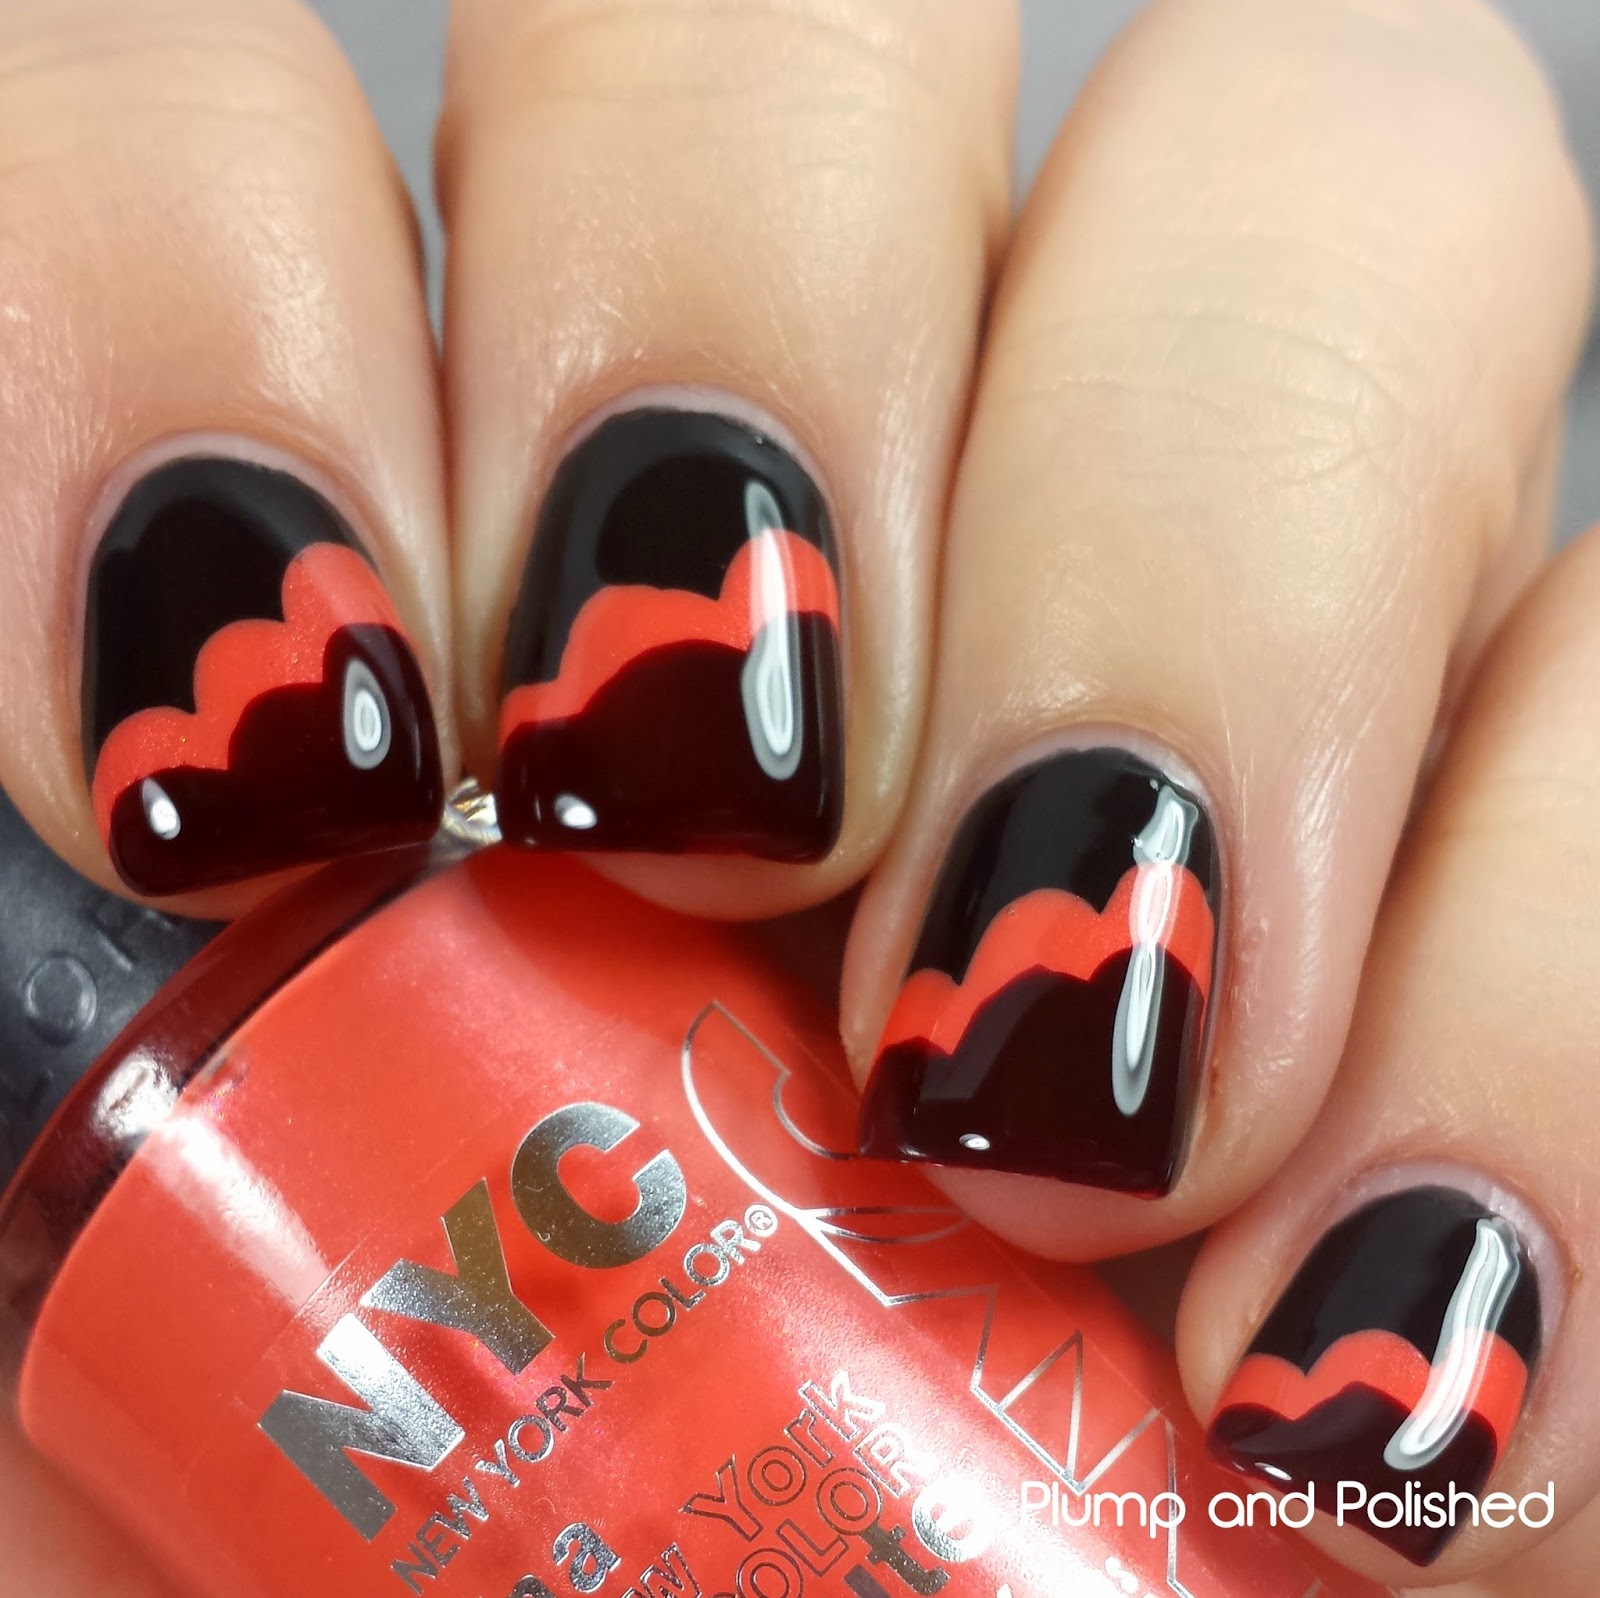 NYC New York Color - Midnight Beauty Collection Nail Art